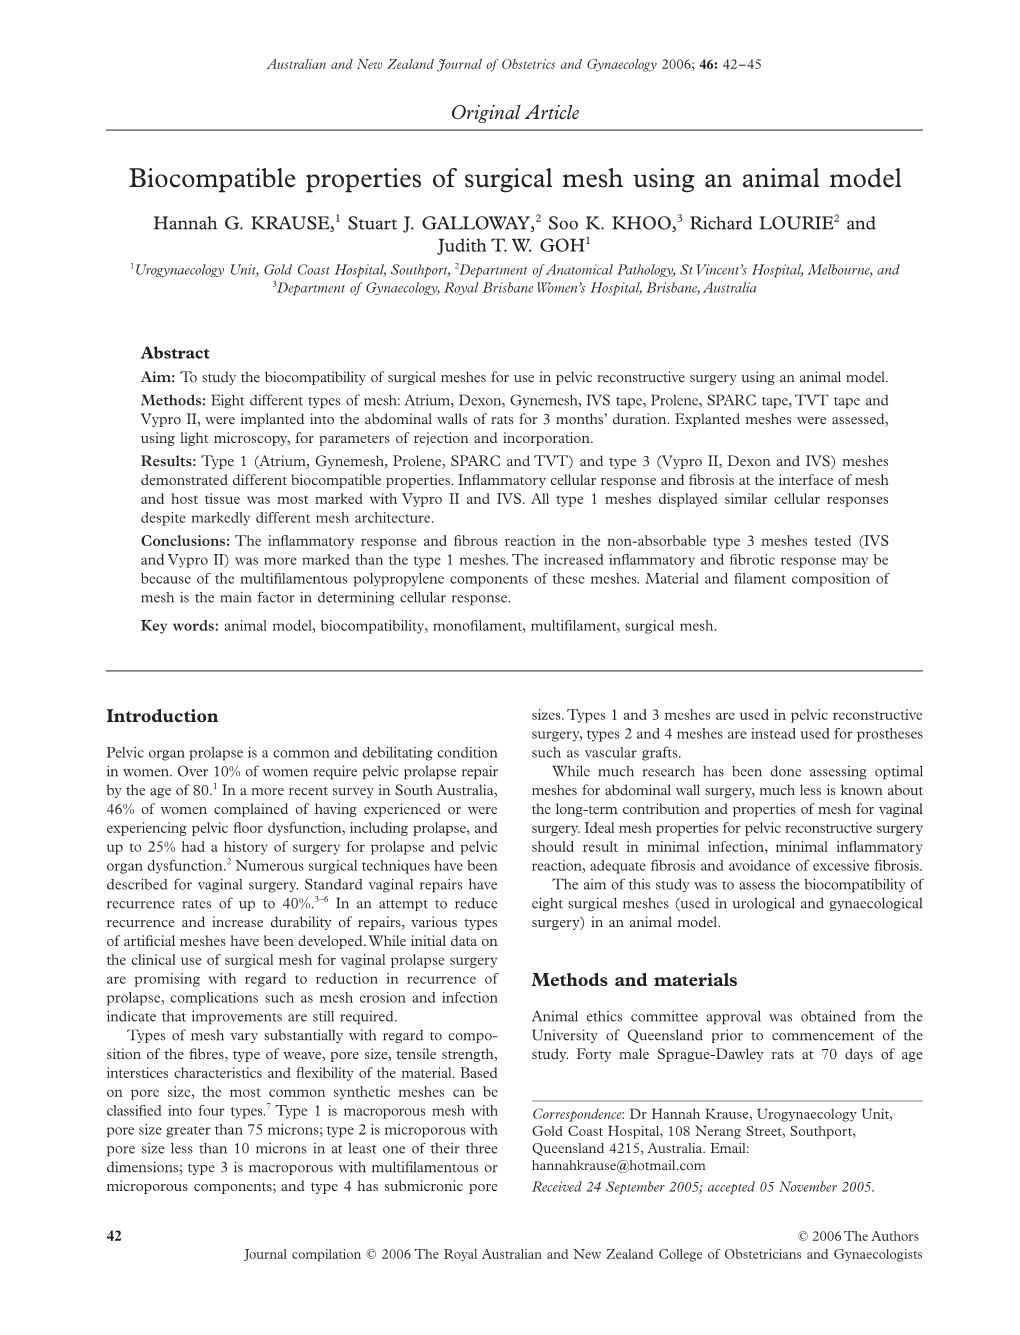 Biocompatible Properties of Surgical Mesh Using an Animal Model